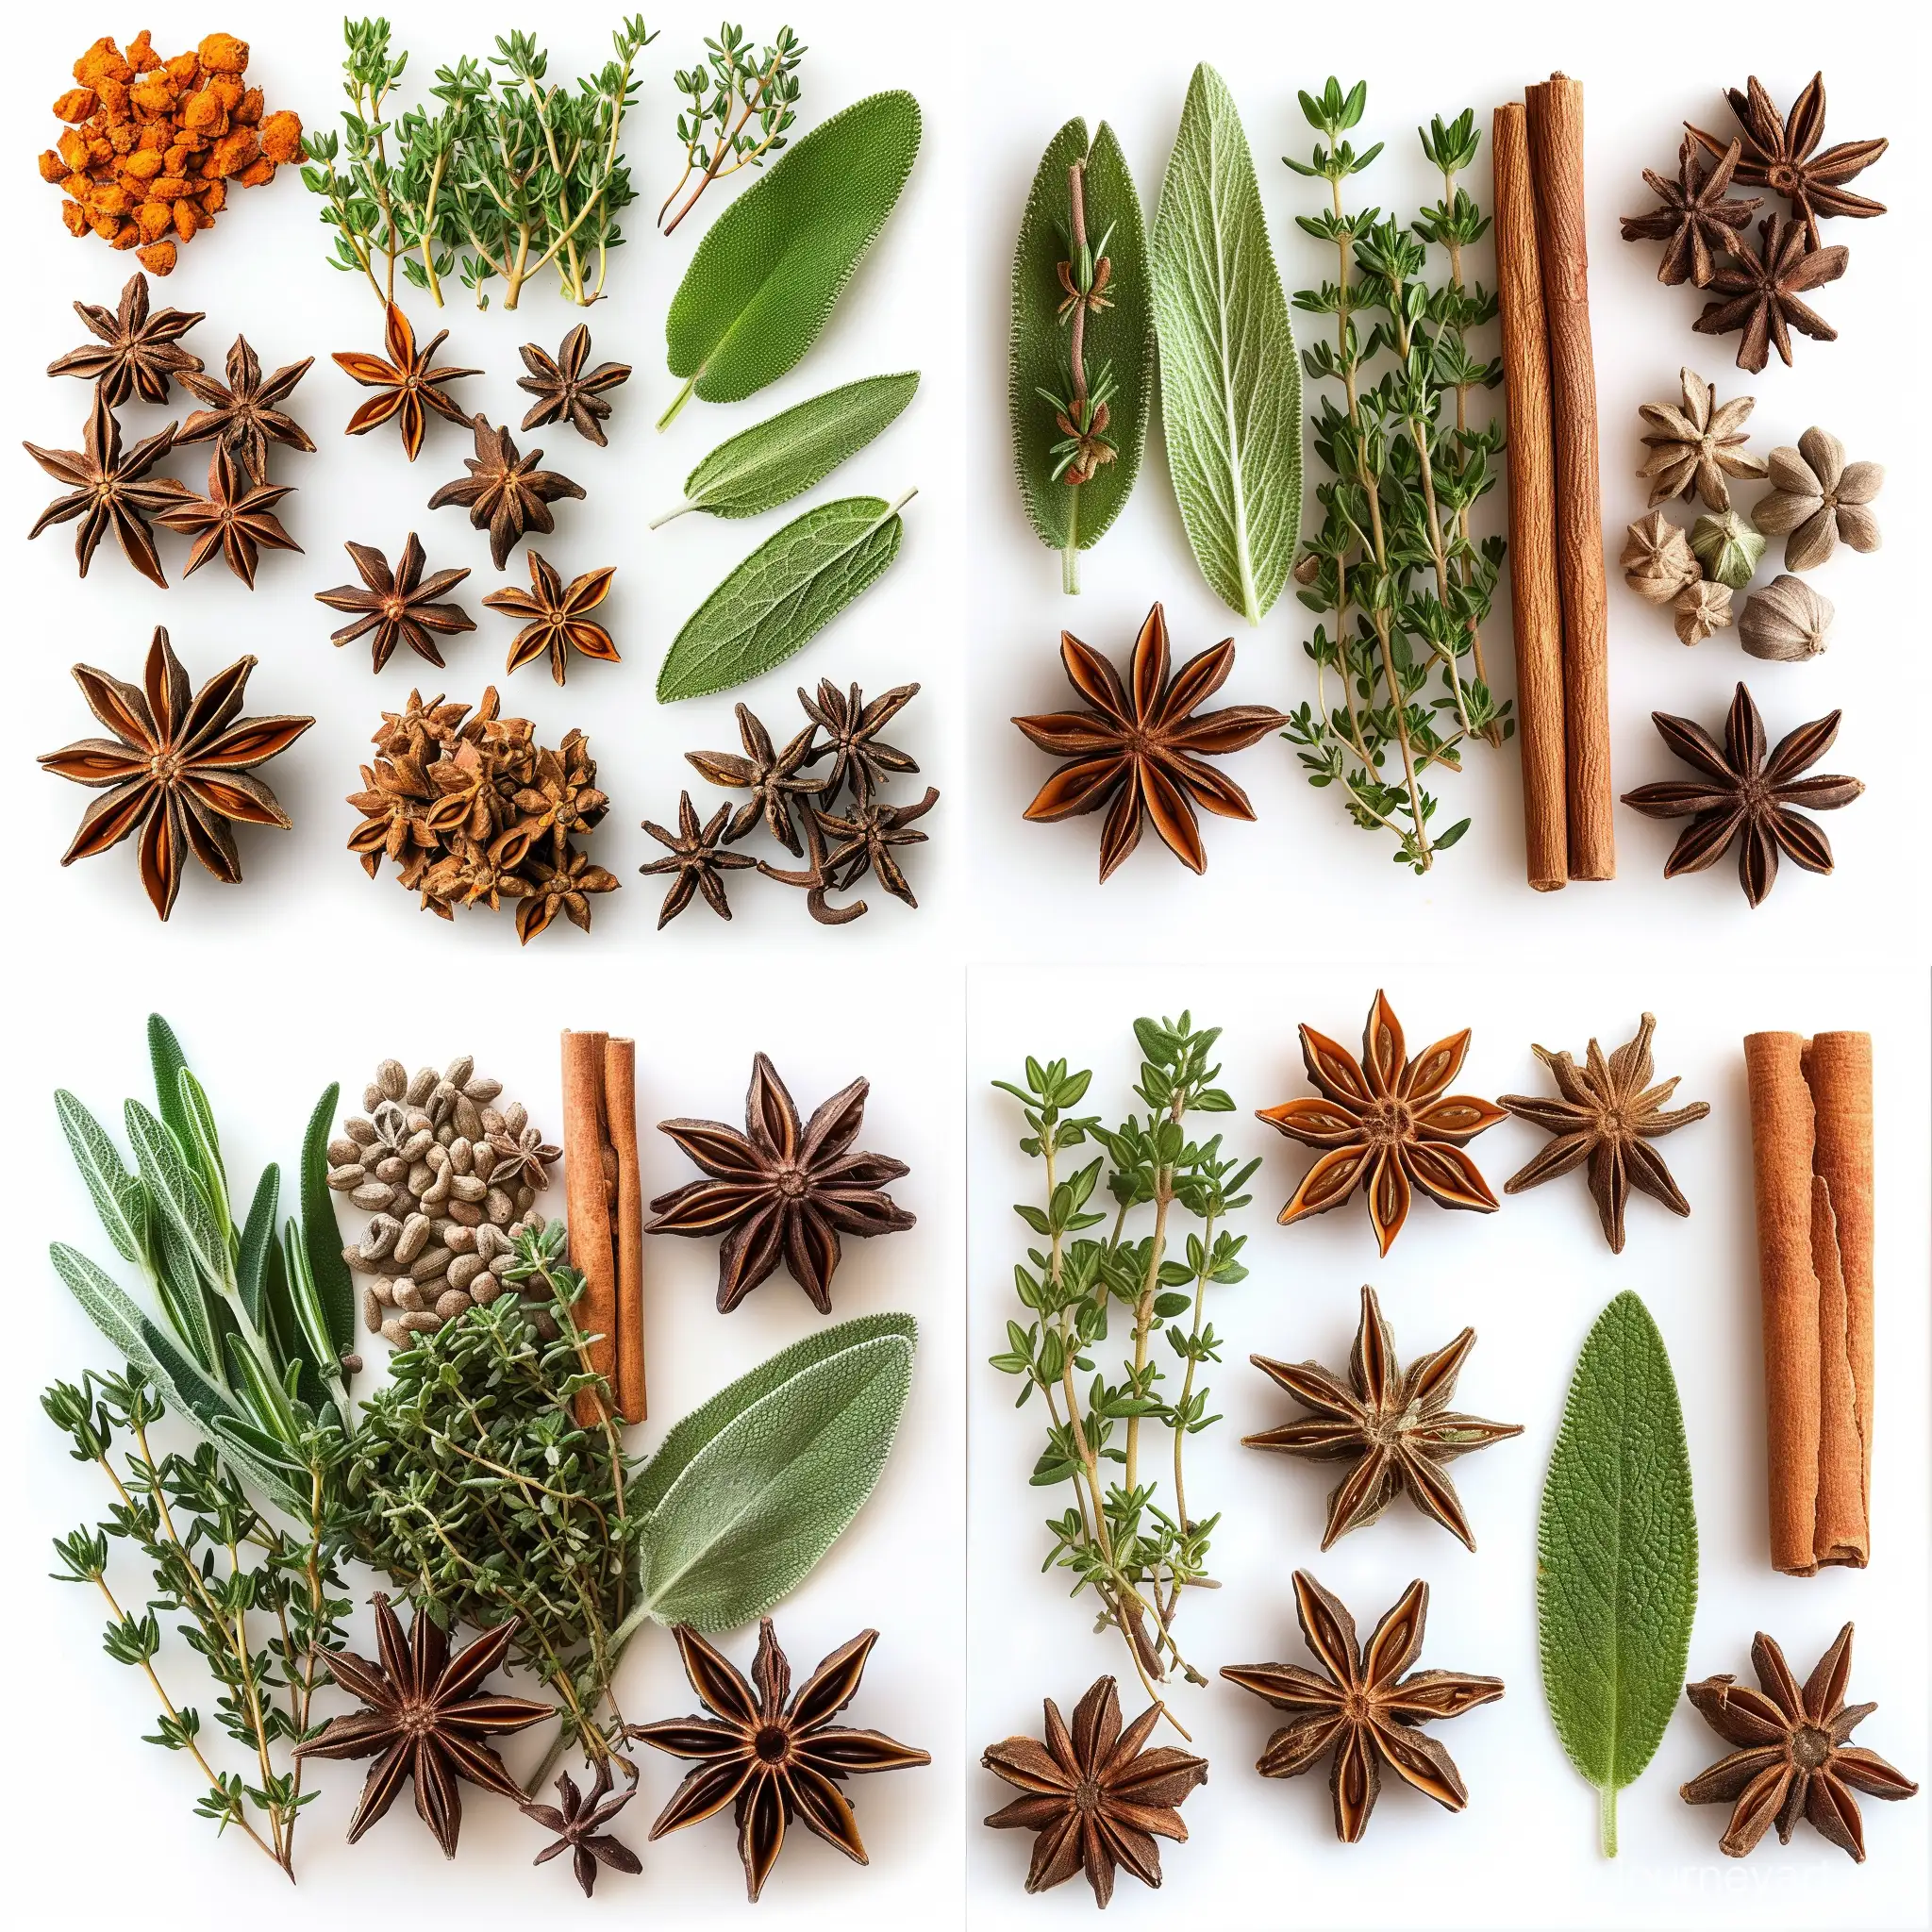 Aromatic-Herbs-and-Spices-Arrangement-with-Star-Anise-Moringa-Cinnamon-Thyme-Rosemary-and-Sage